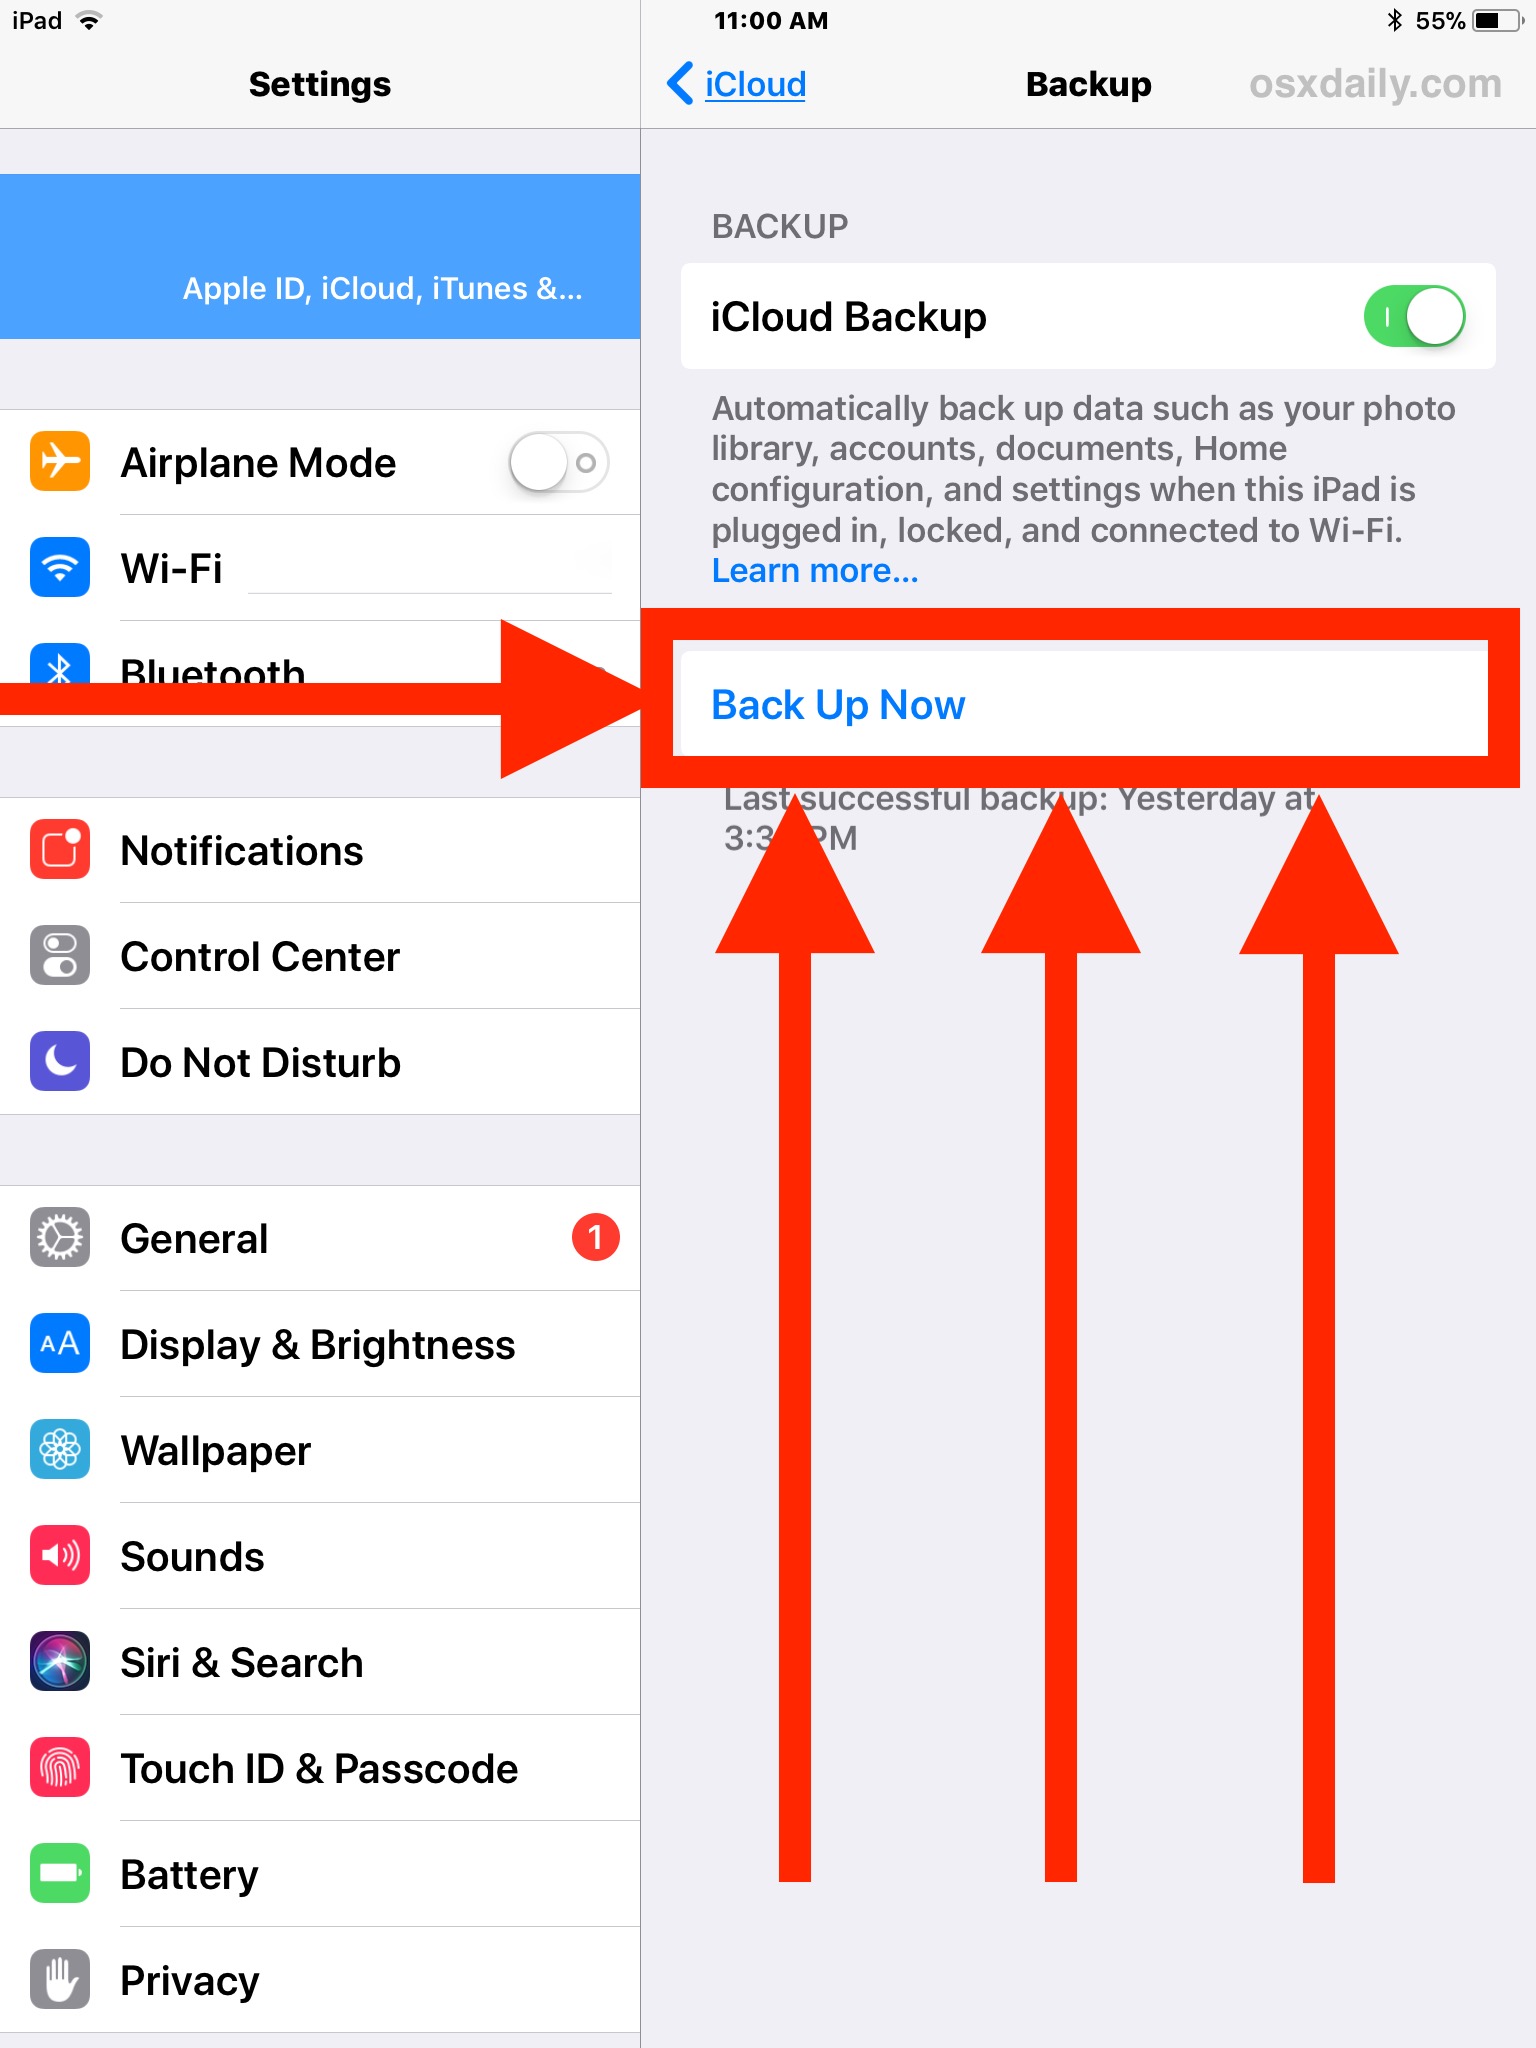 does app data backup to icloud